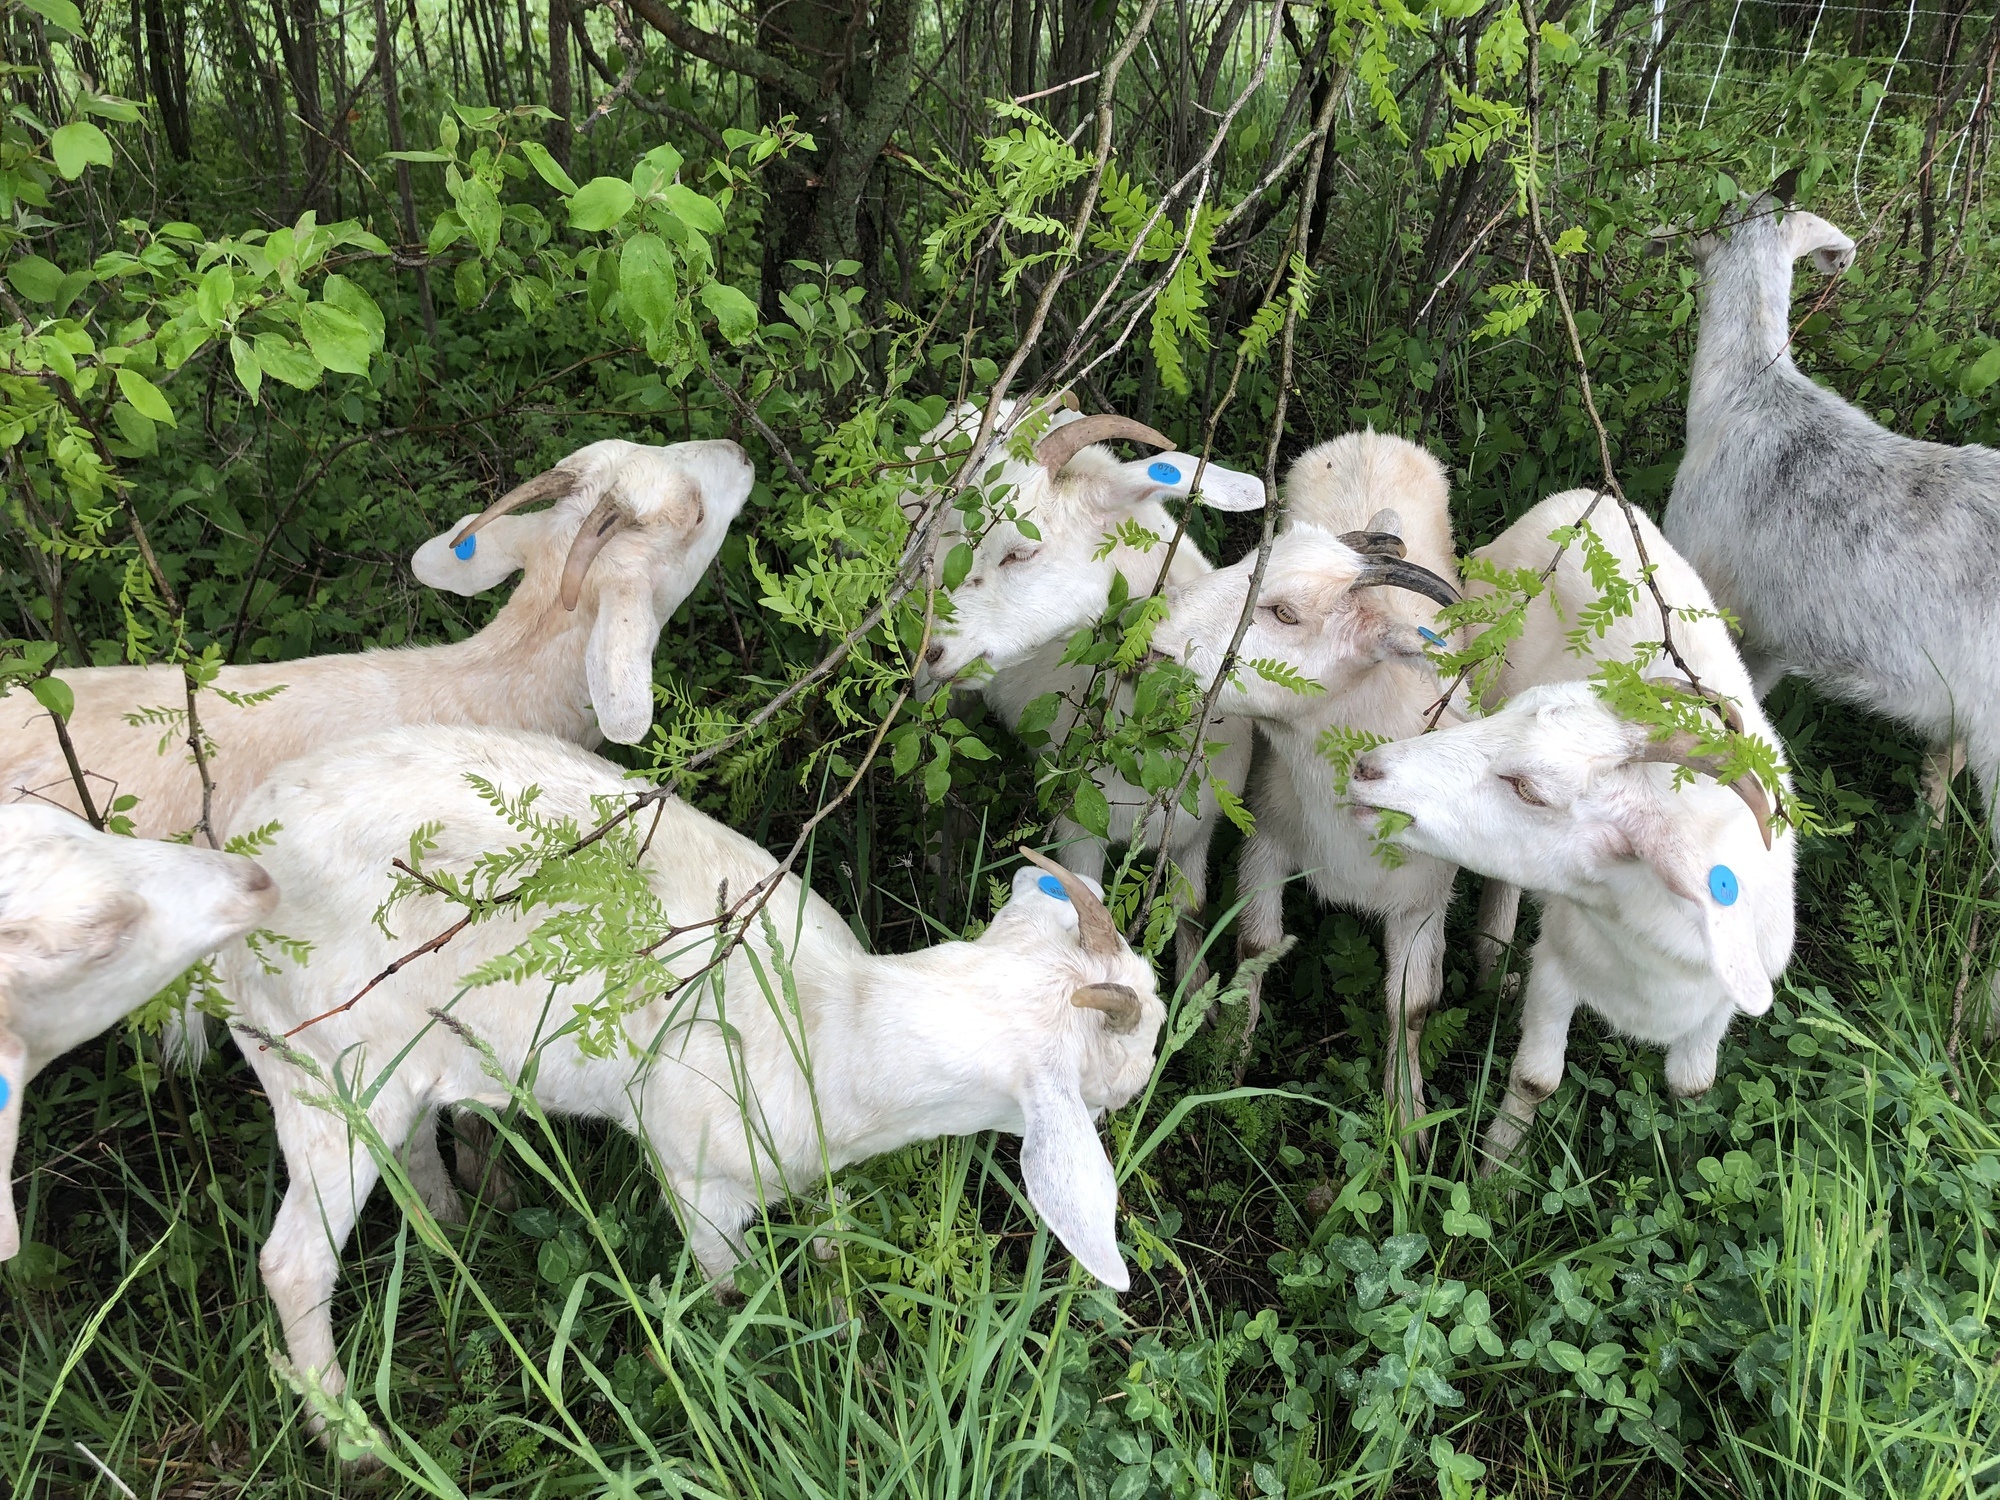 White goats with blue dots on ears eat leaves and grass closely together. November 2021